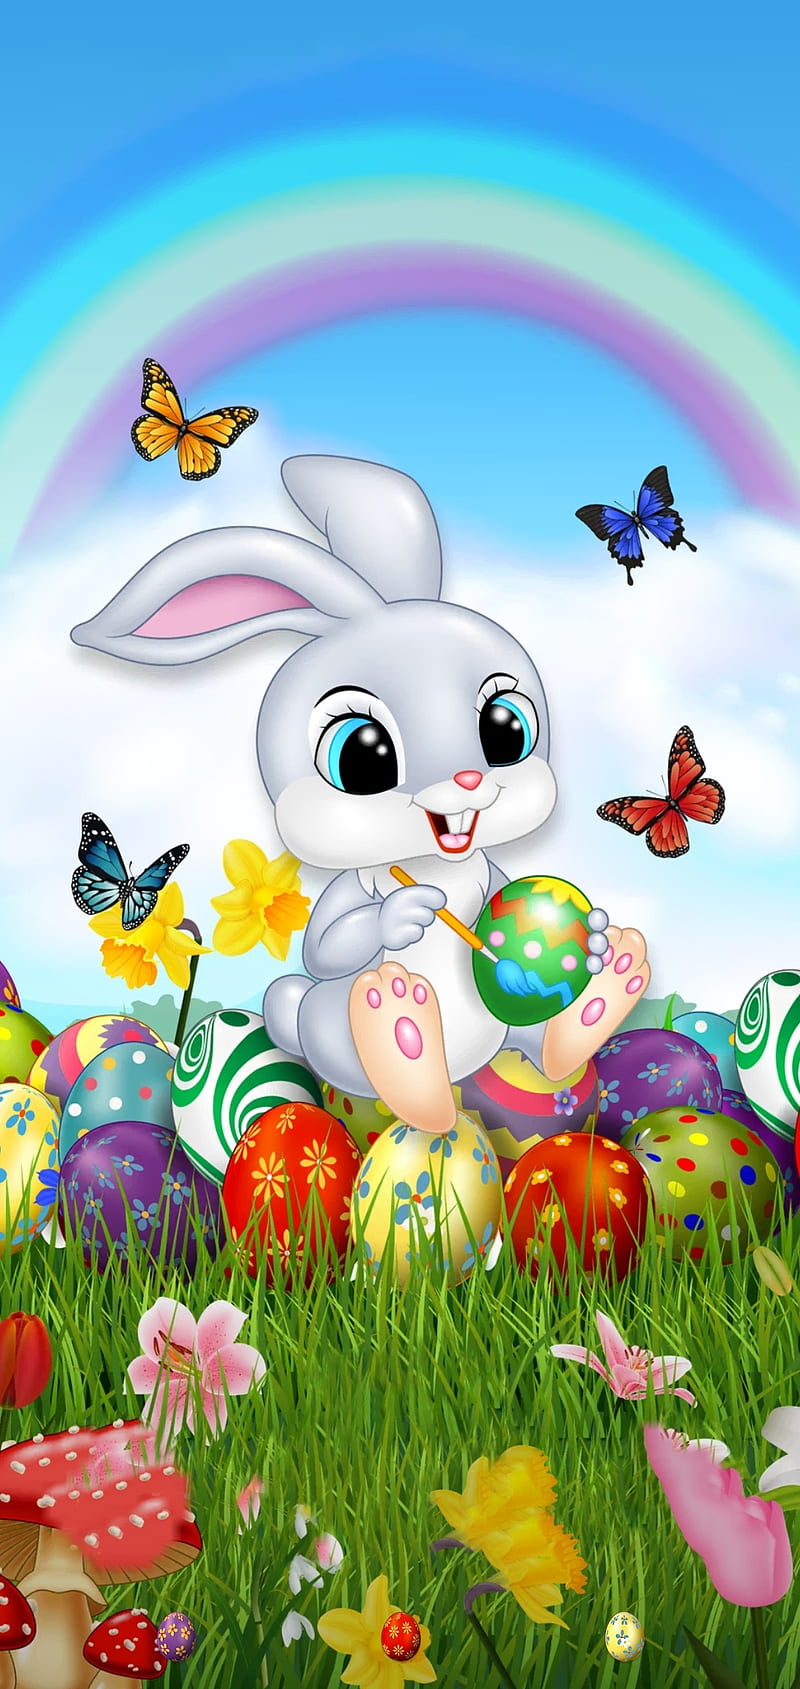 Easter bunny eggs and spring wallpaper seamless Vector Image